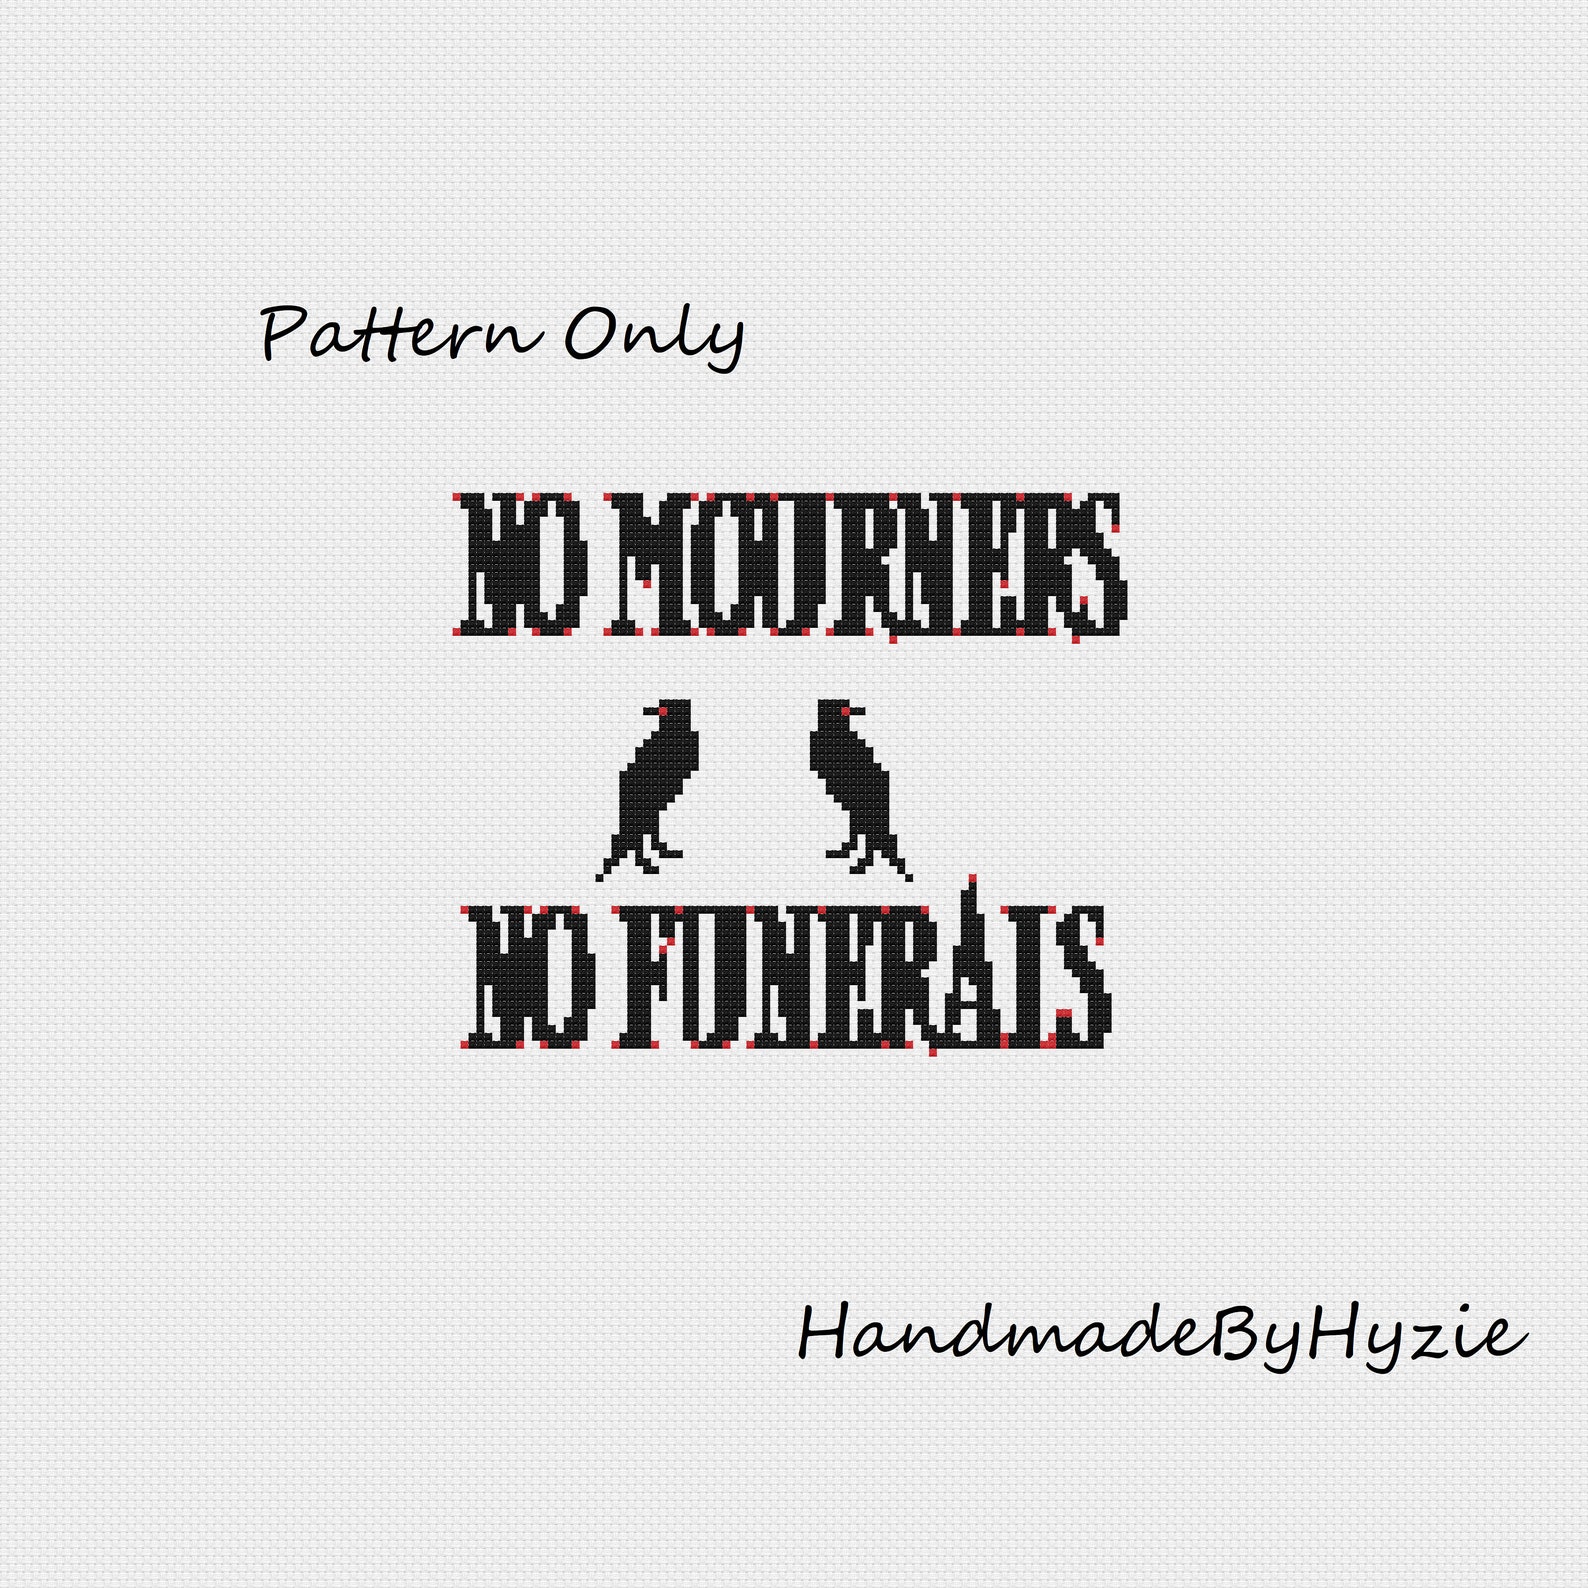 Cross stitch in black and red that reads "No mourners, no funerals" with two crows.